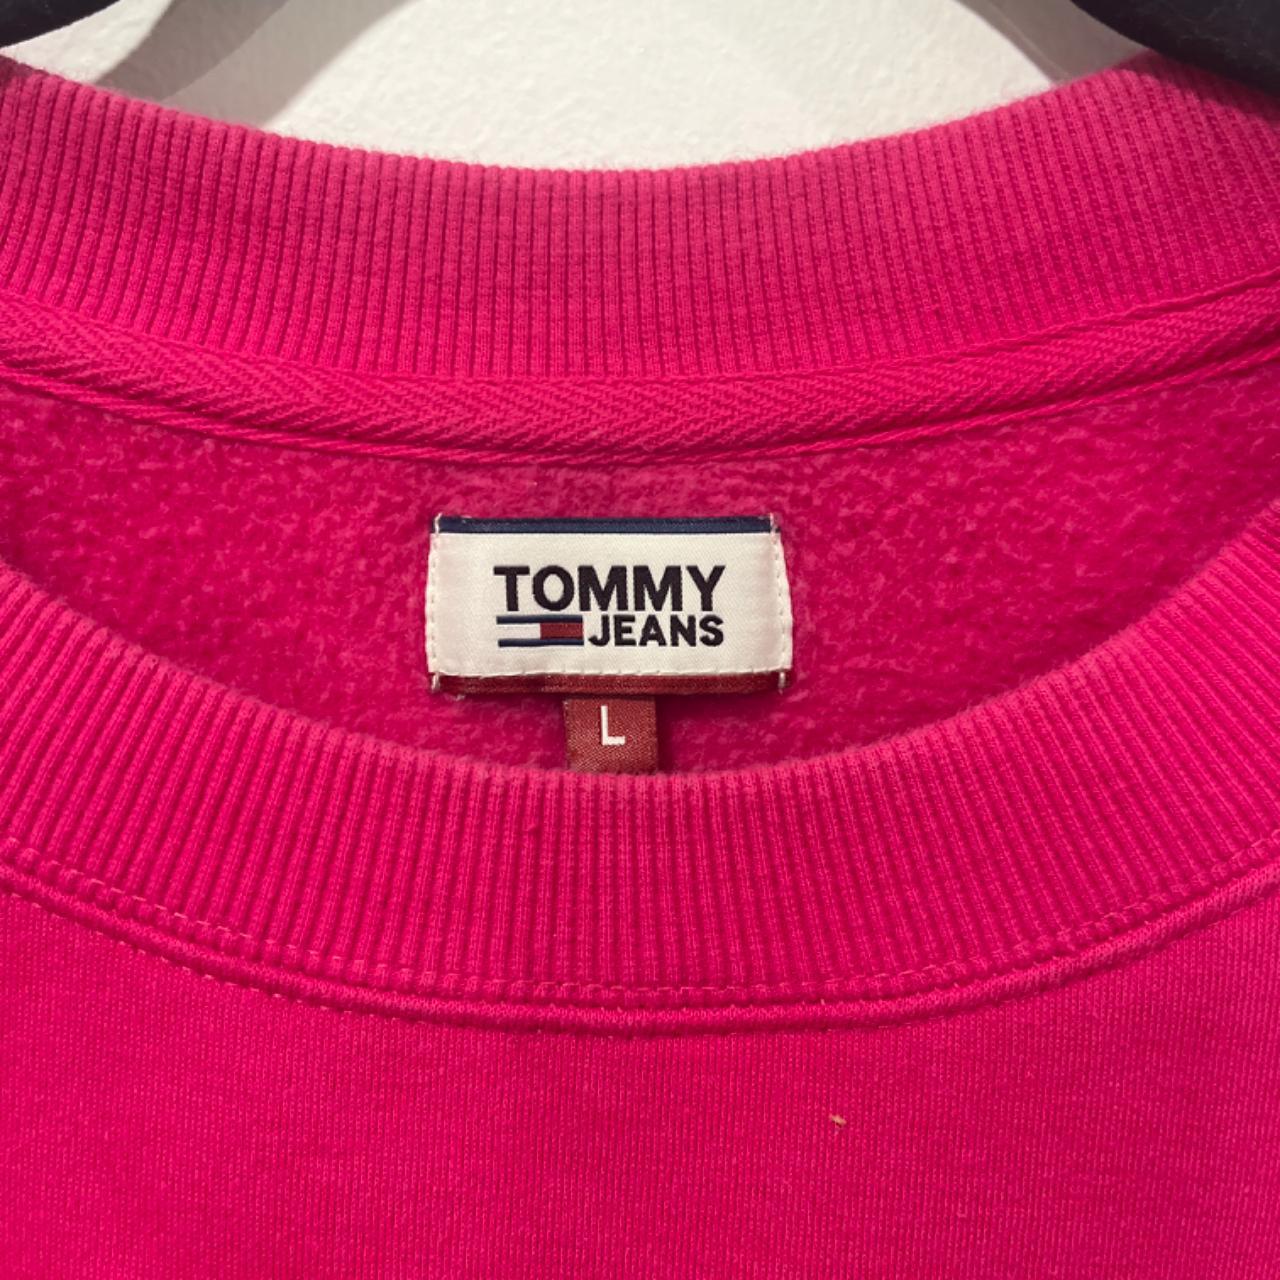 Tommy Jeans Pink Sweater X1 small stain at the front - Depop